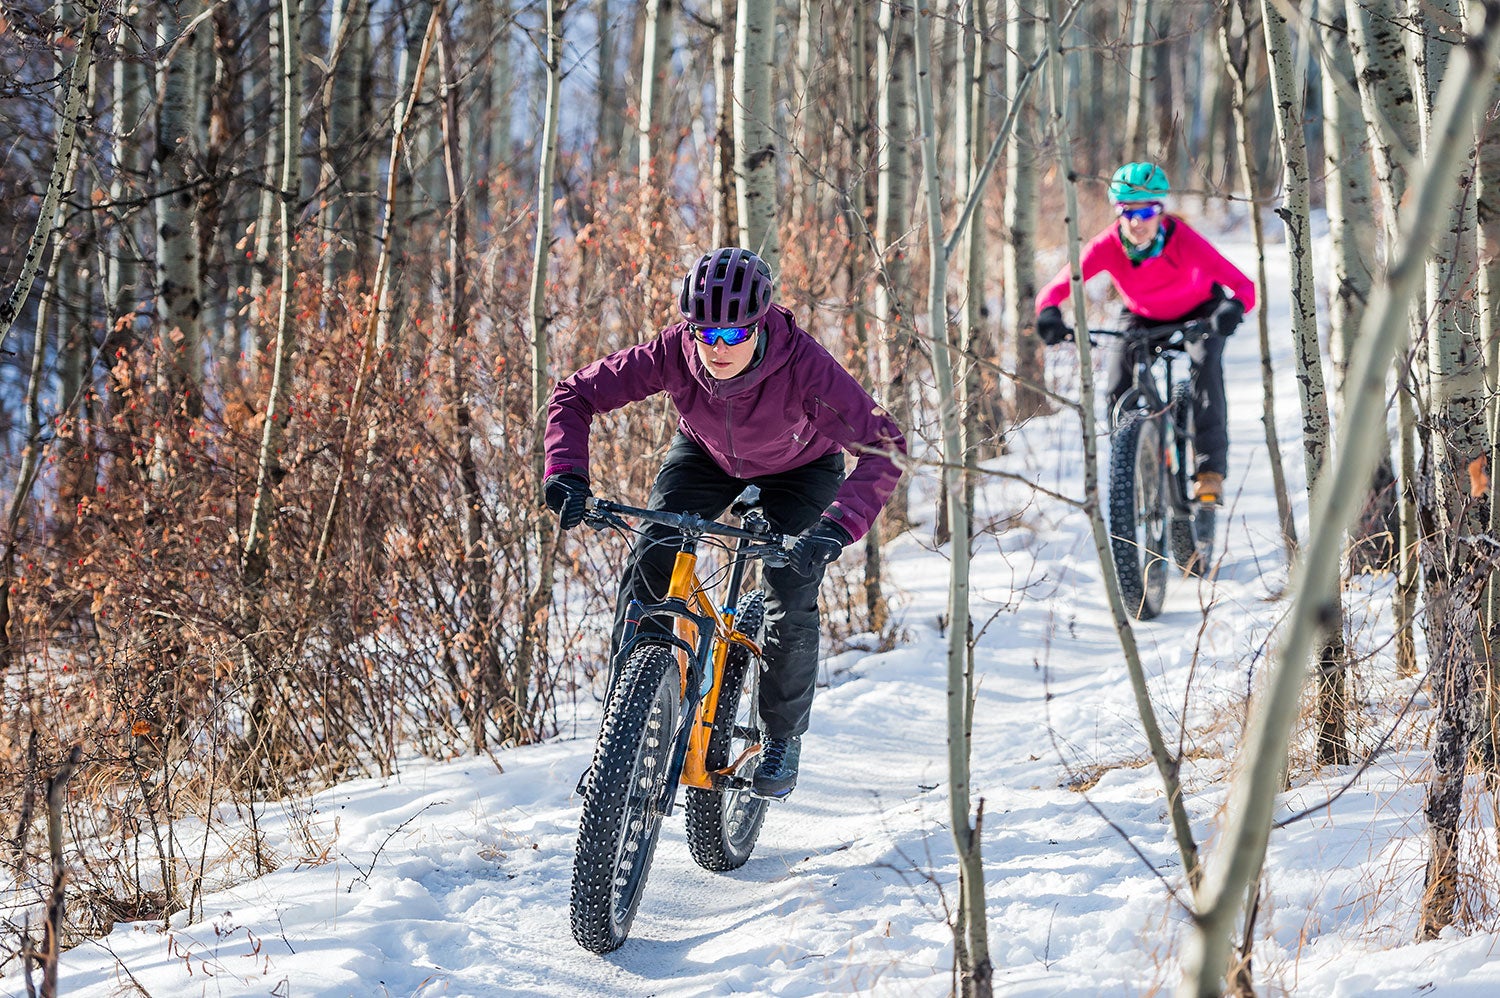 Two female cyclists hunched over their handle bars as they ride through trees on fat bikes in winter